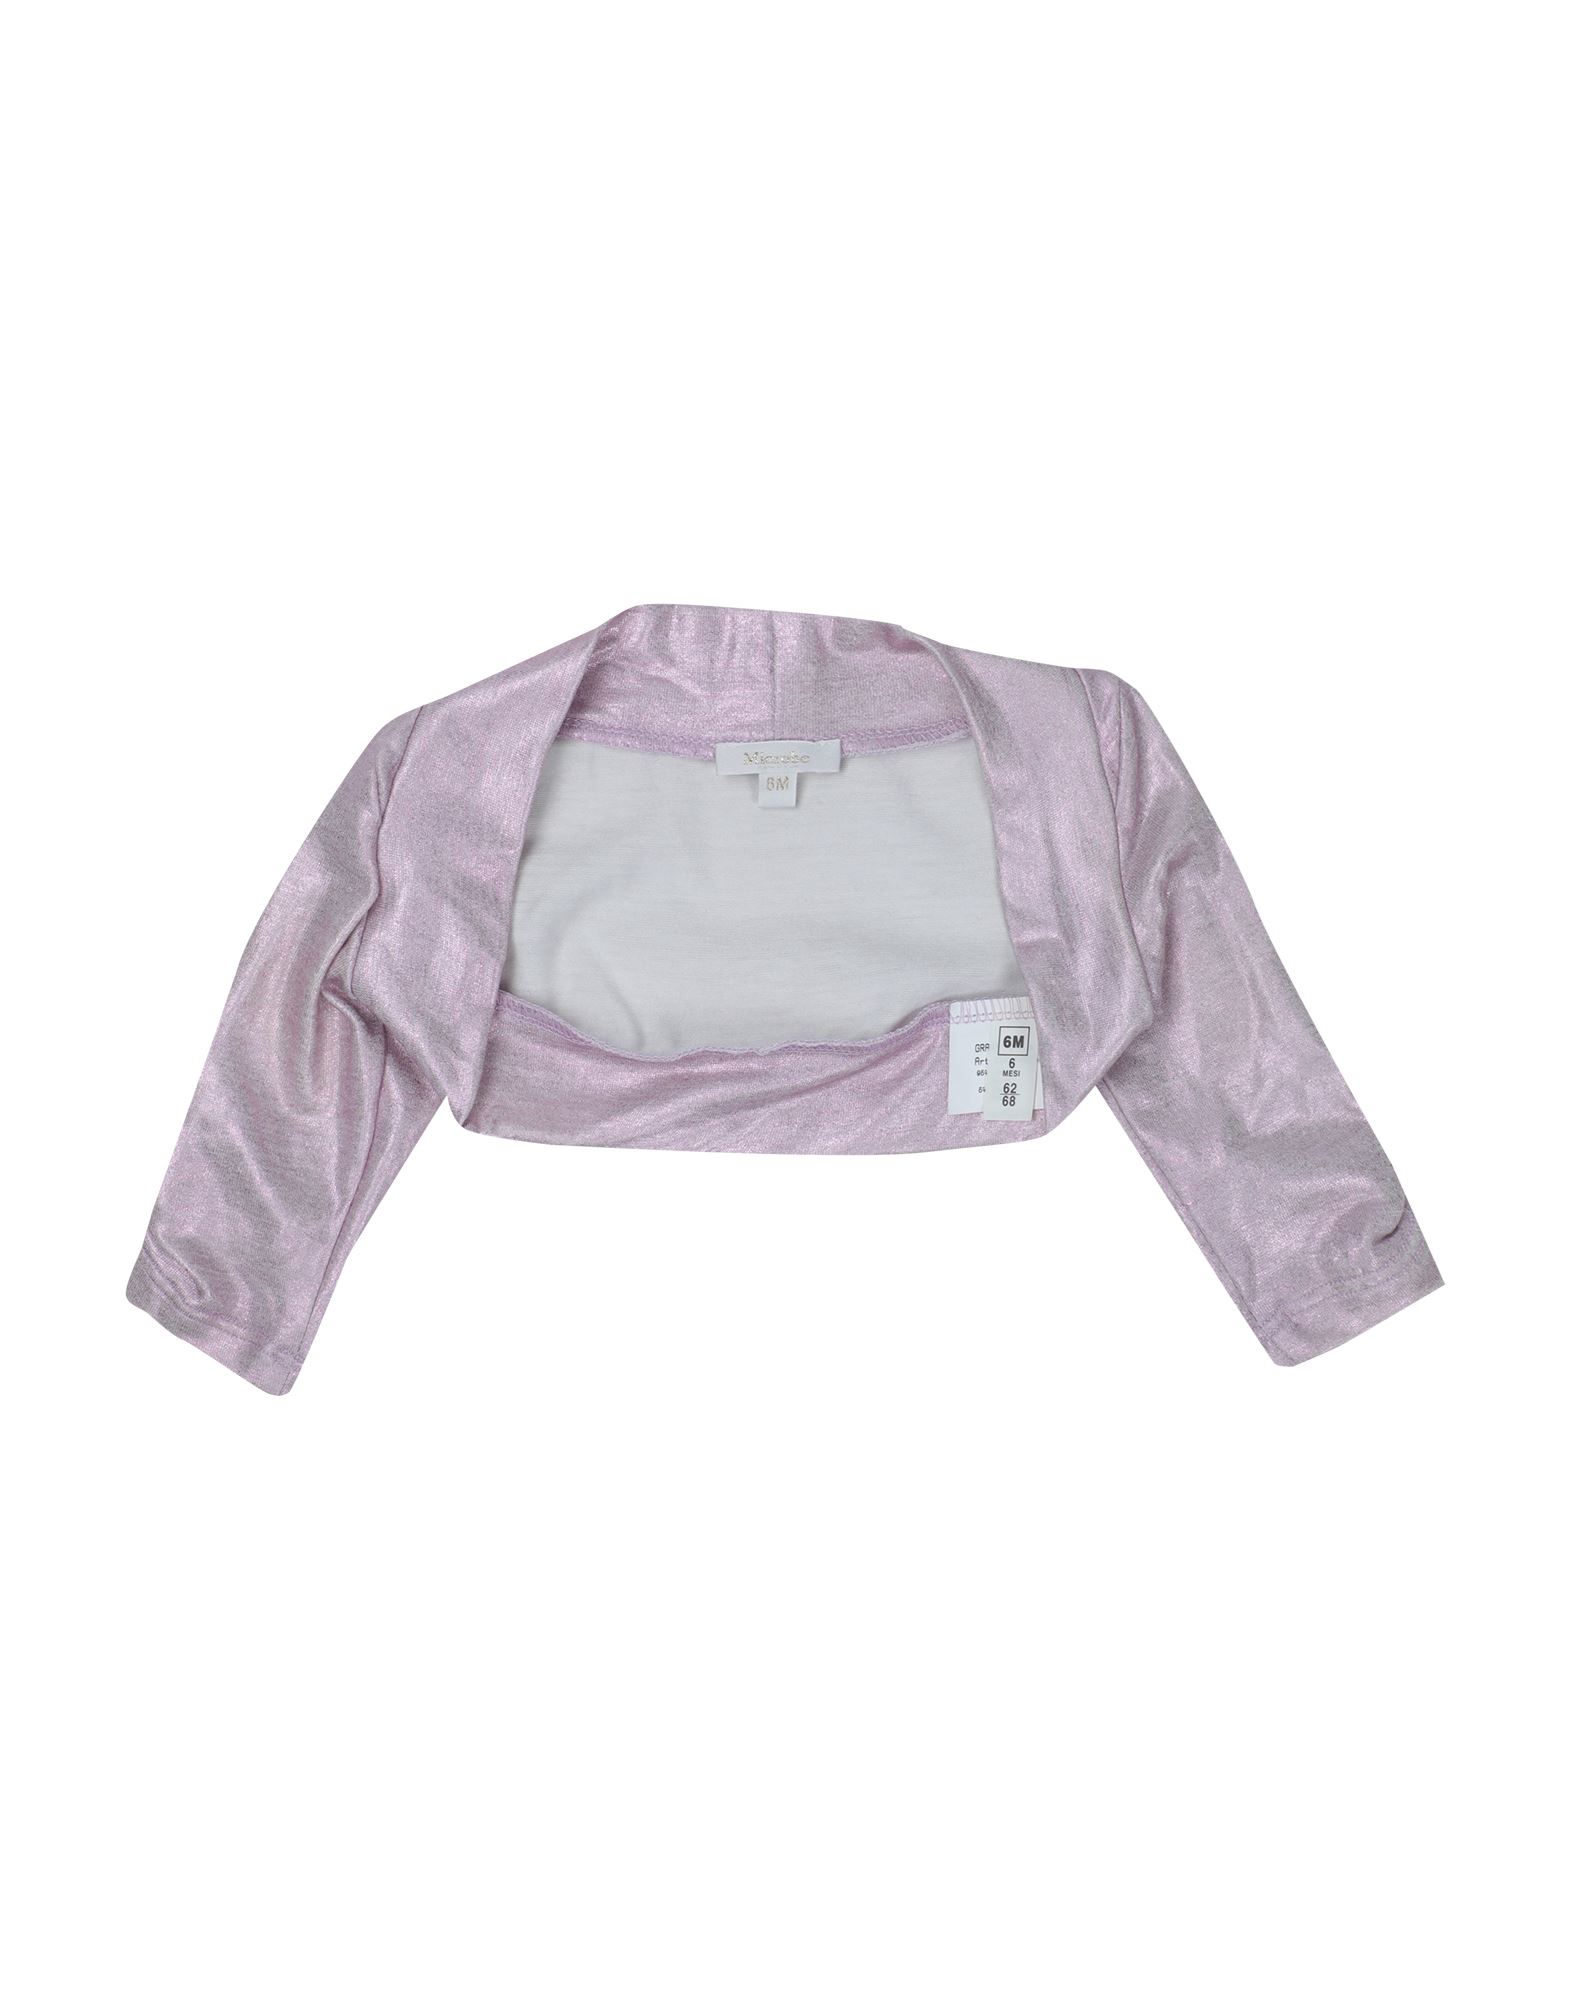 MICROBE by MISS GRANT Wickelpullover Kinder Rosa von MICROBE by MISS GRANT